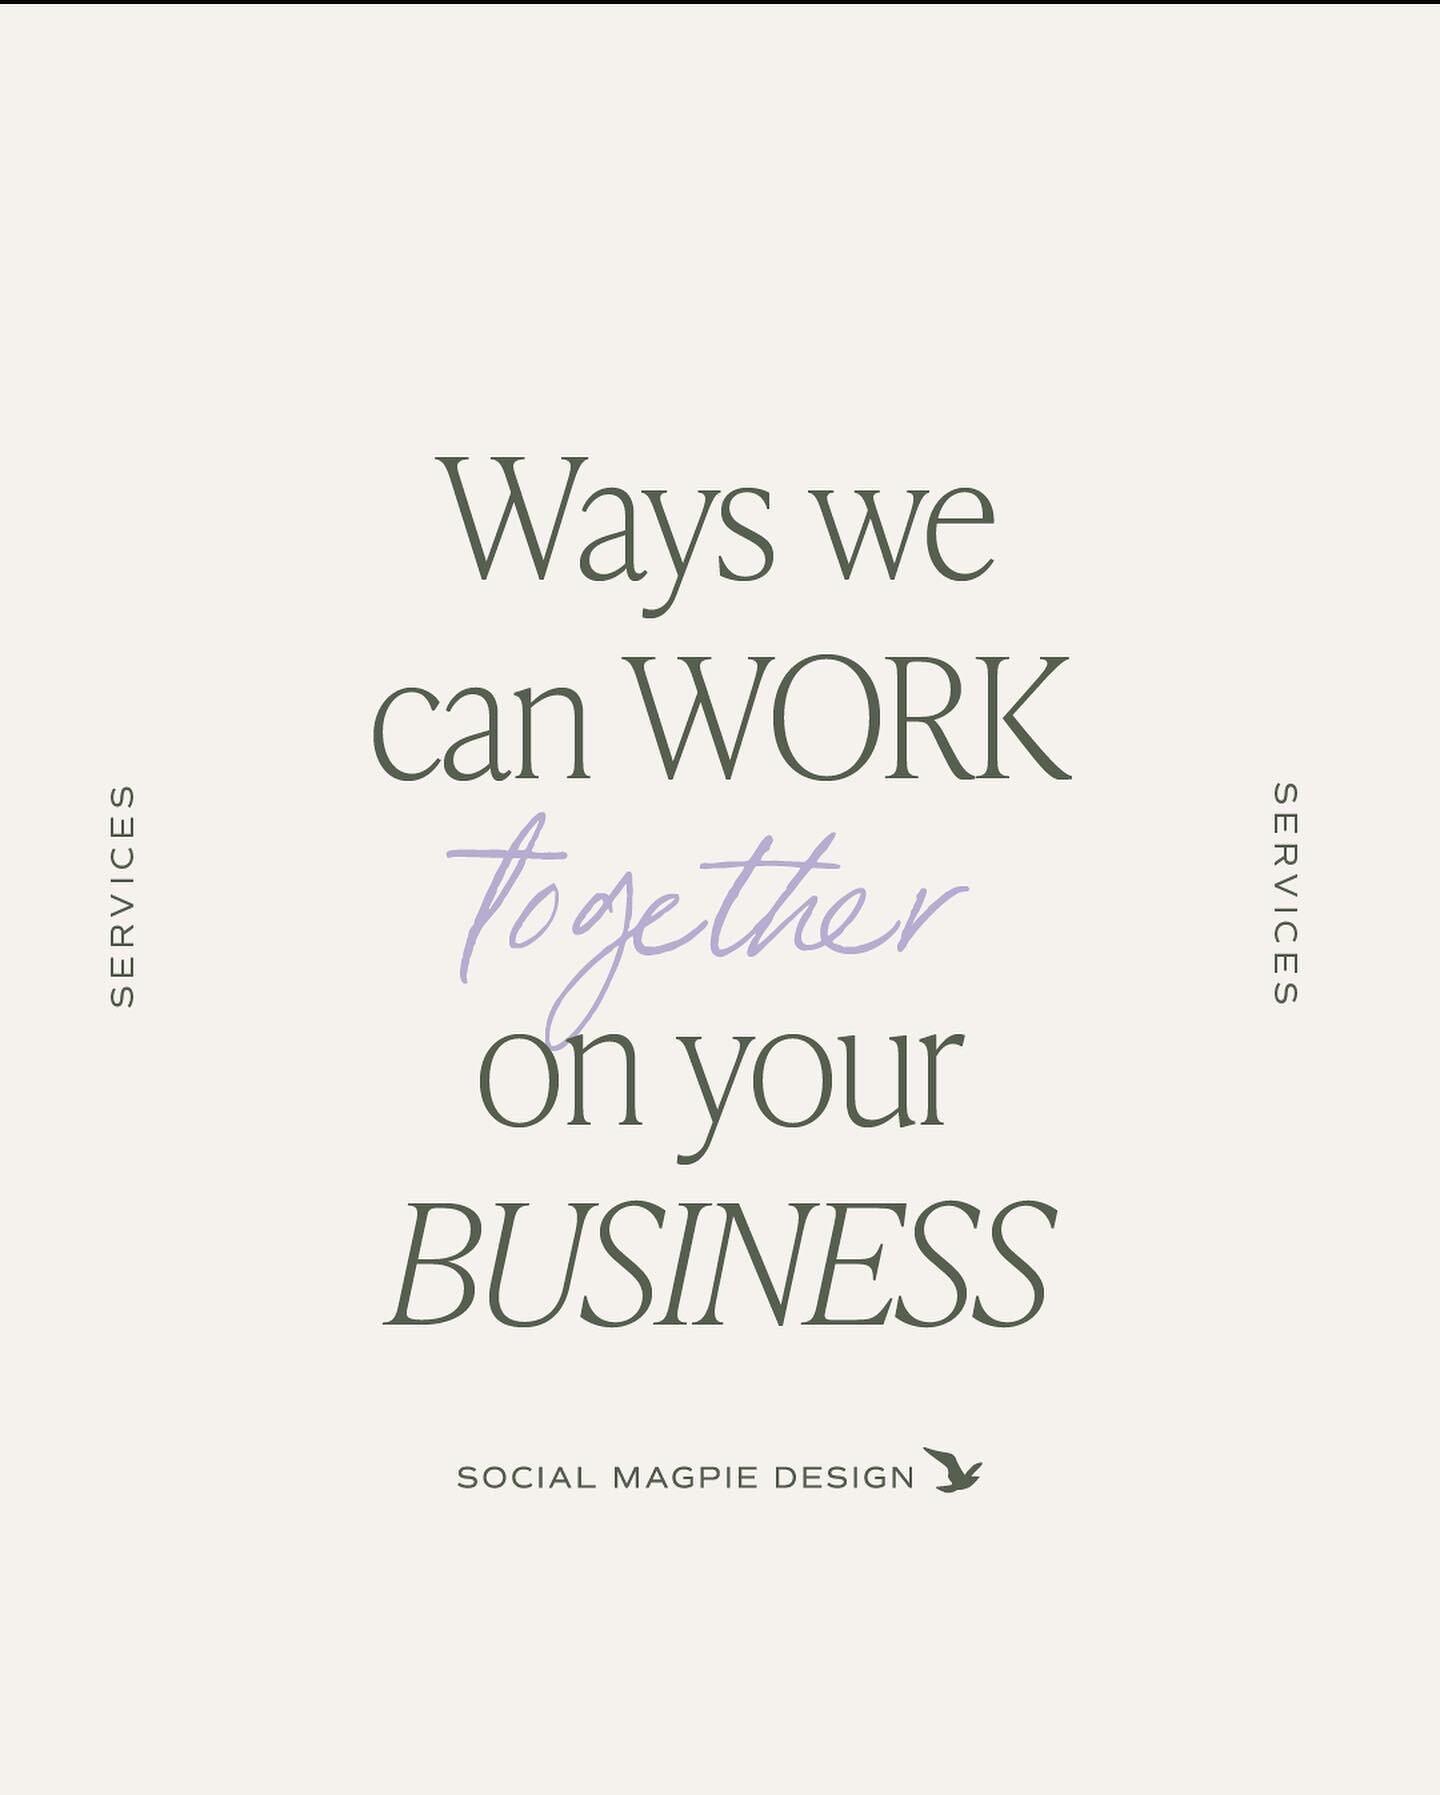 Wondering how we can work together?!

No matter where you are in your business journey I have design packages to support you at every stage and help you grow your business.

From brand audit to design intensives to full blown brand and website design